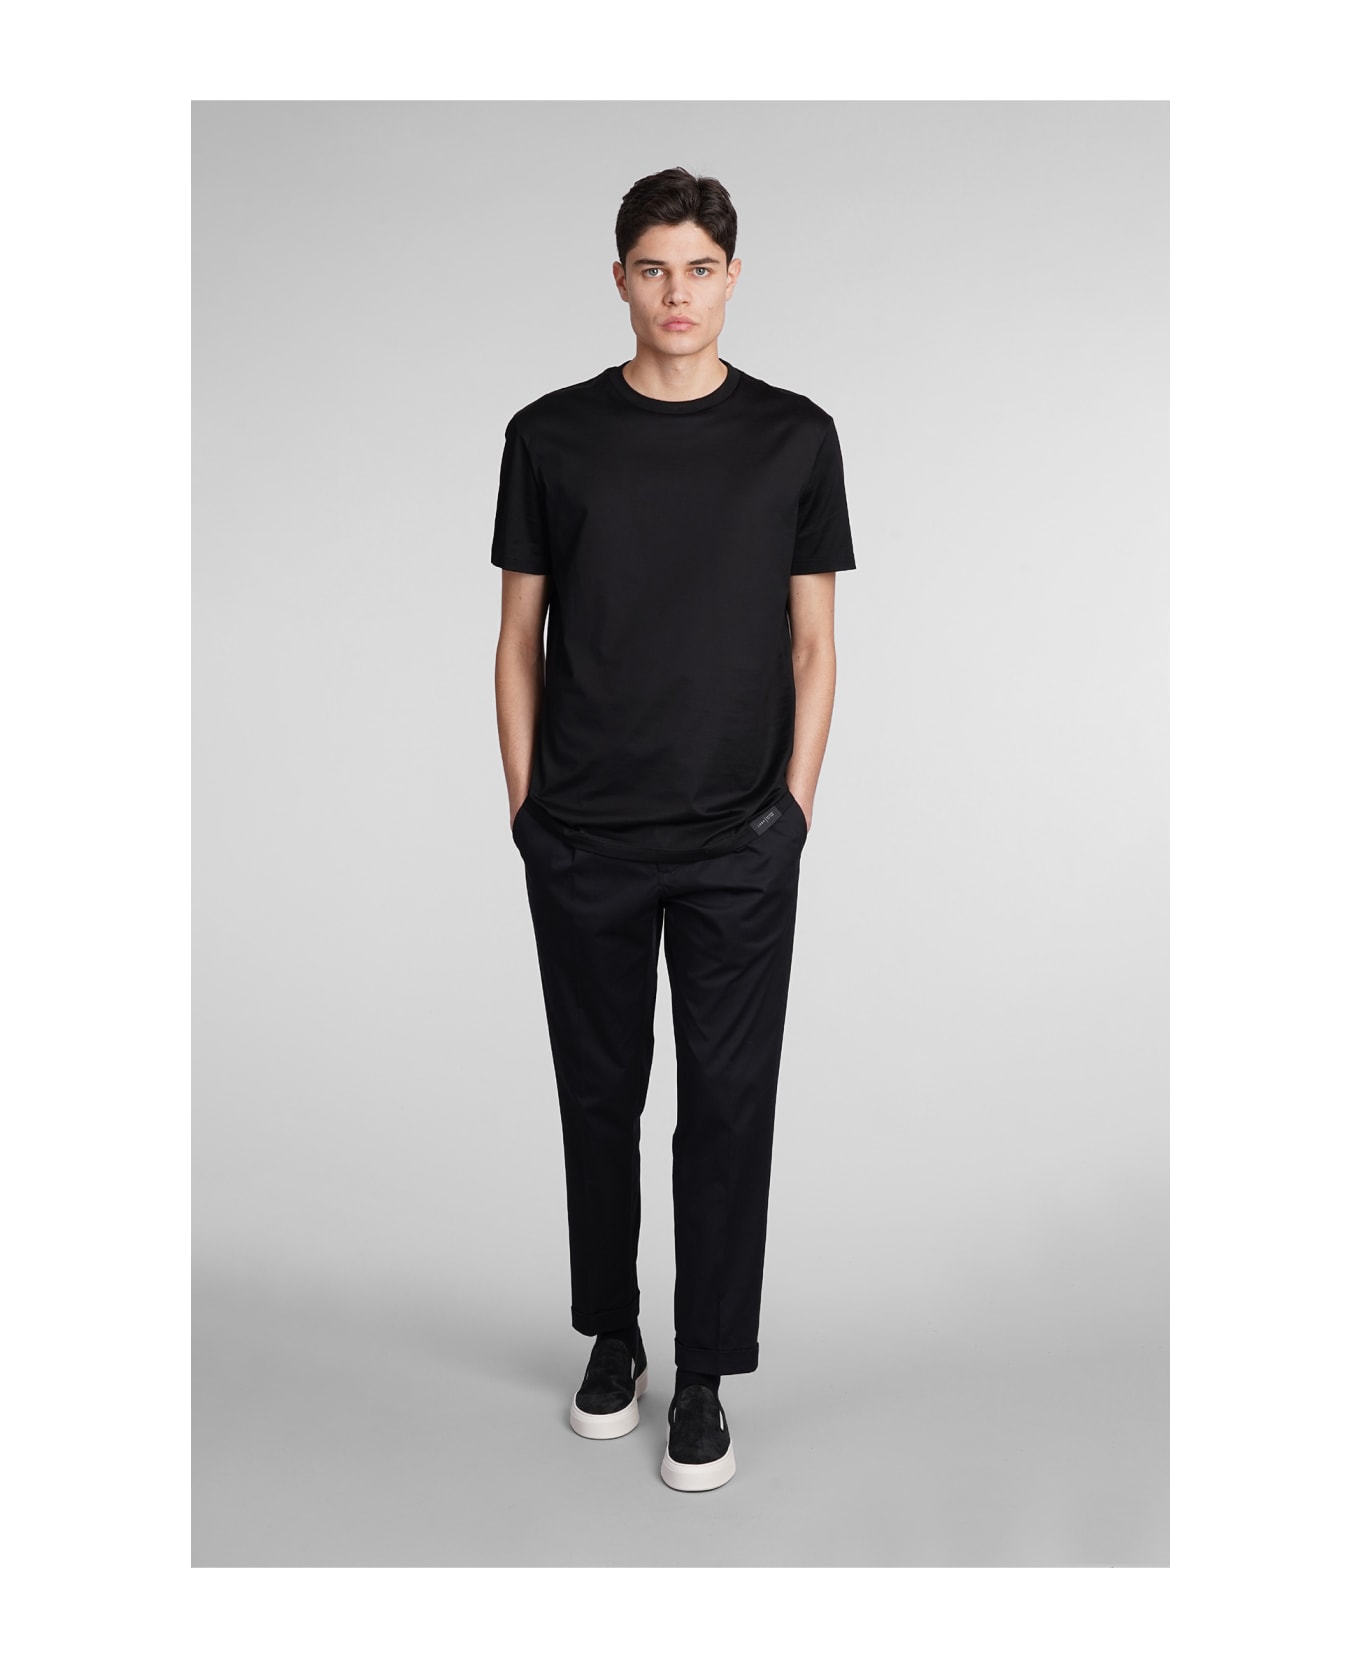 Low Brand Oyster Pants In Black Cotton - black